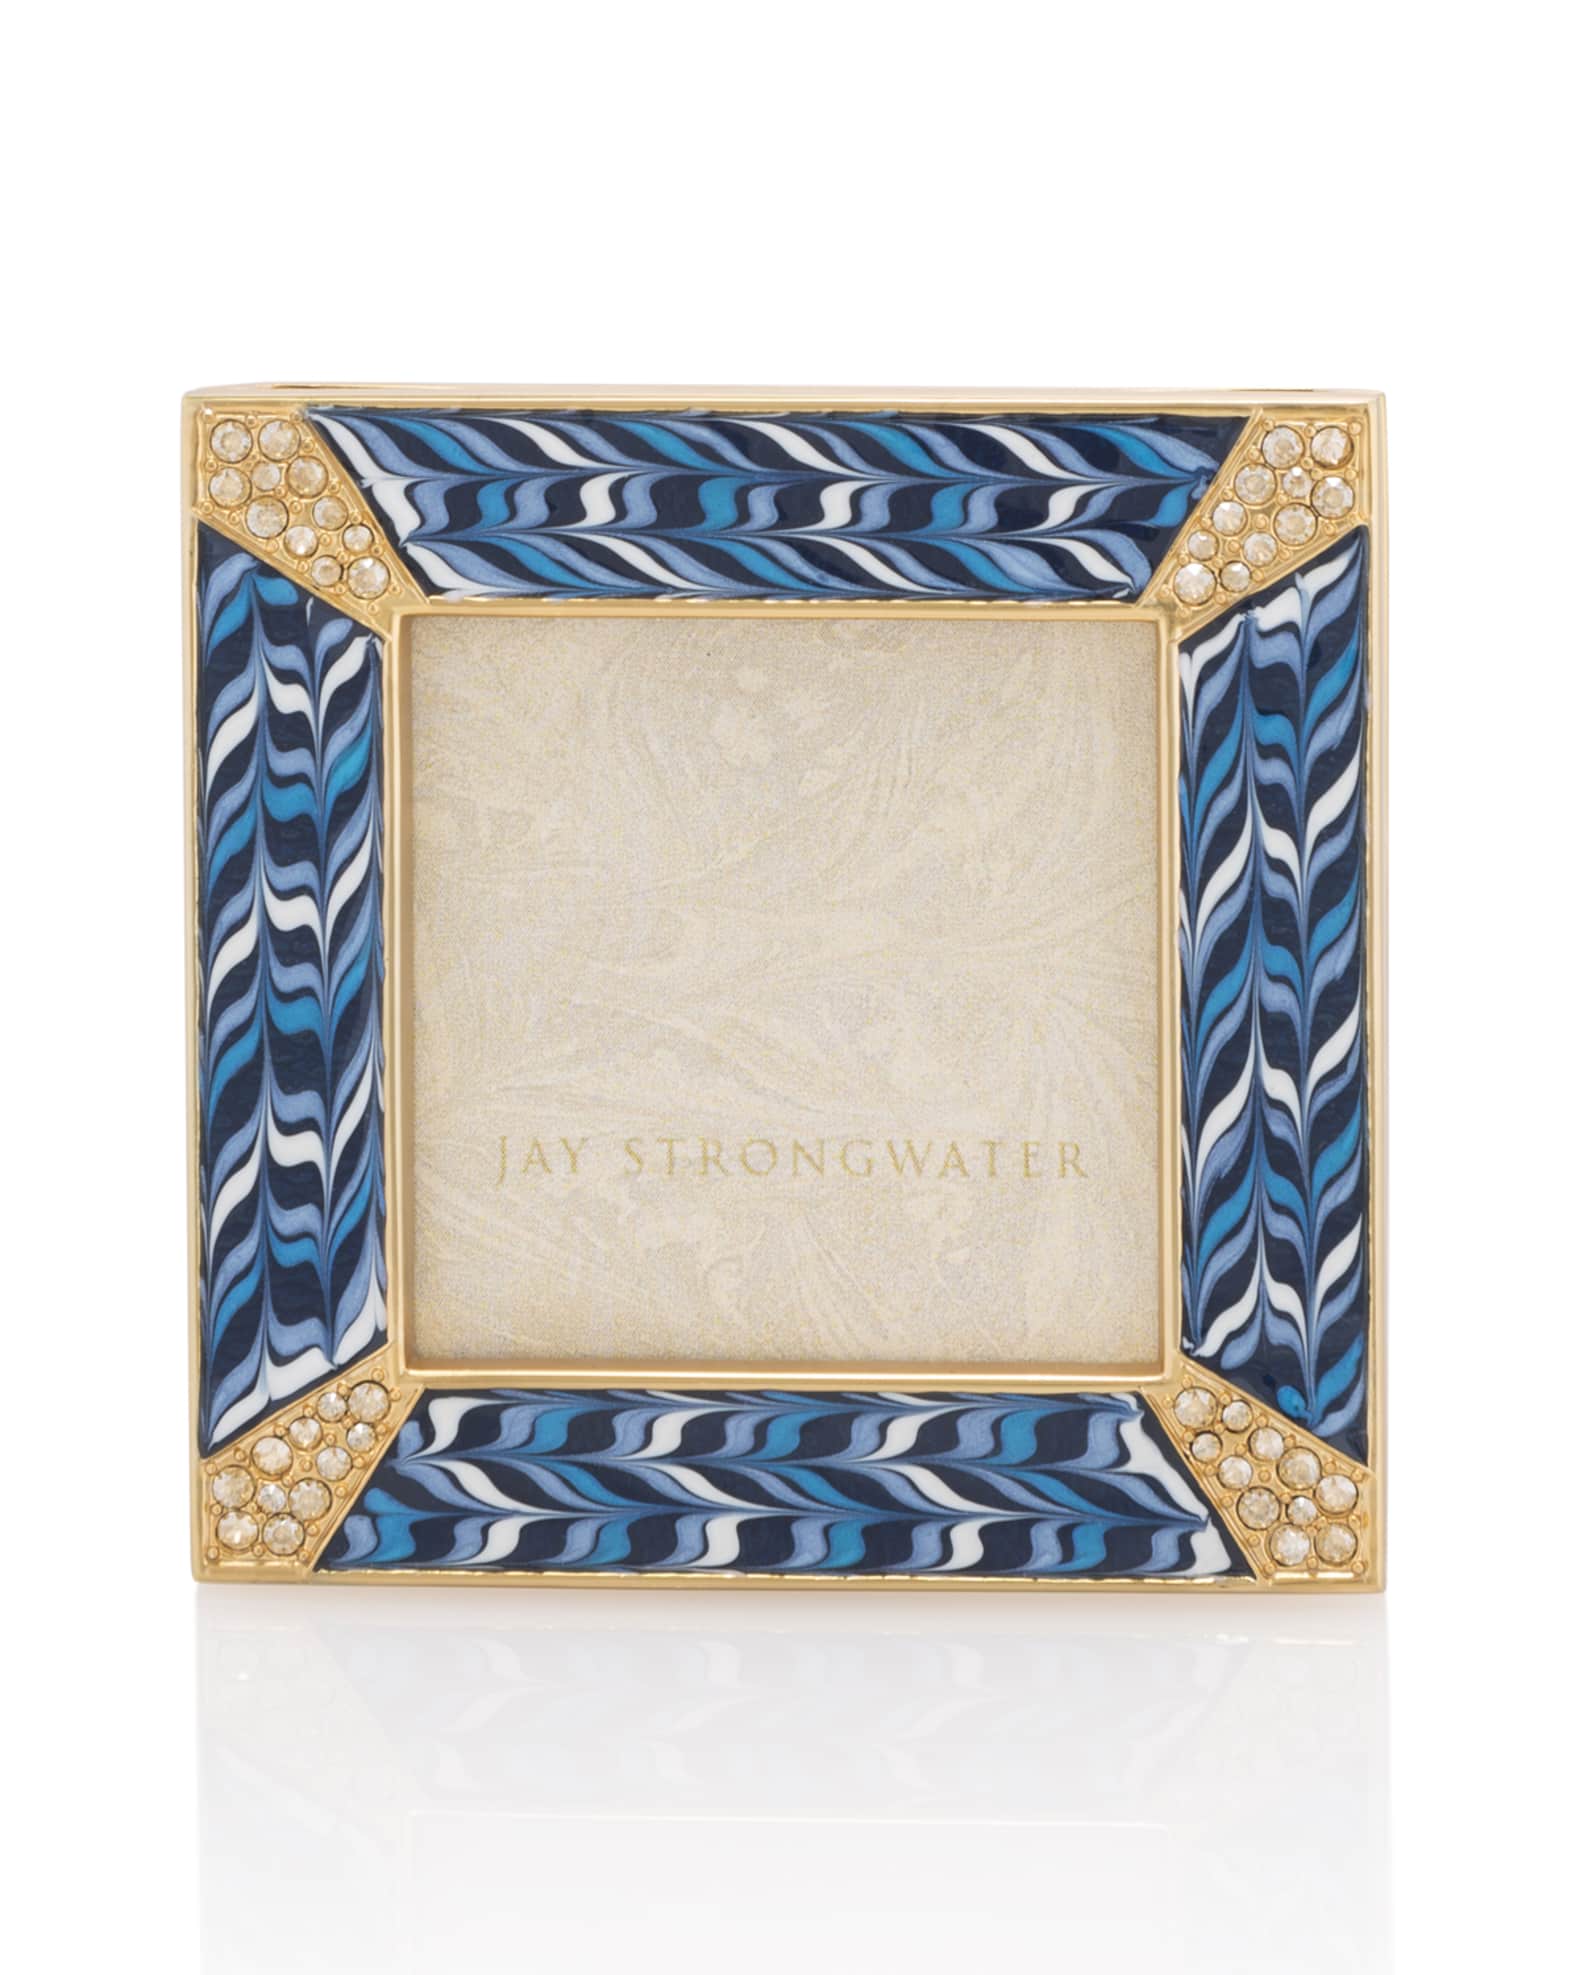 Jay Strongwater Pave Corner 2" Square Picture Frame, Indigo